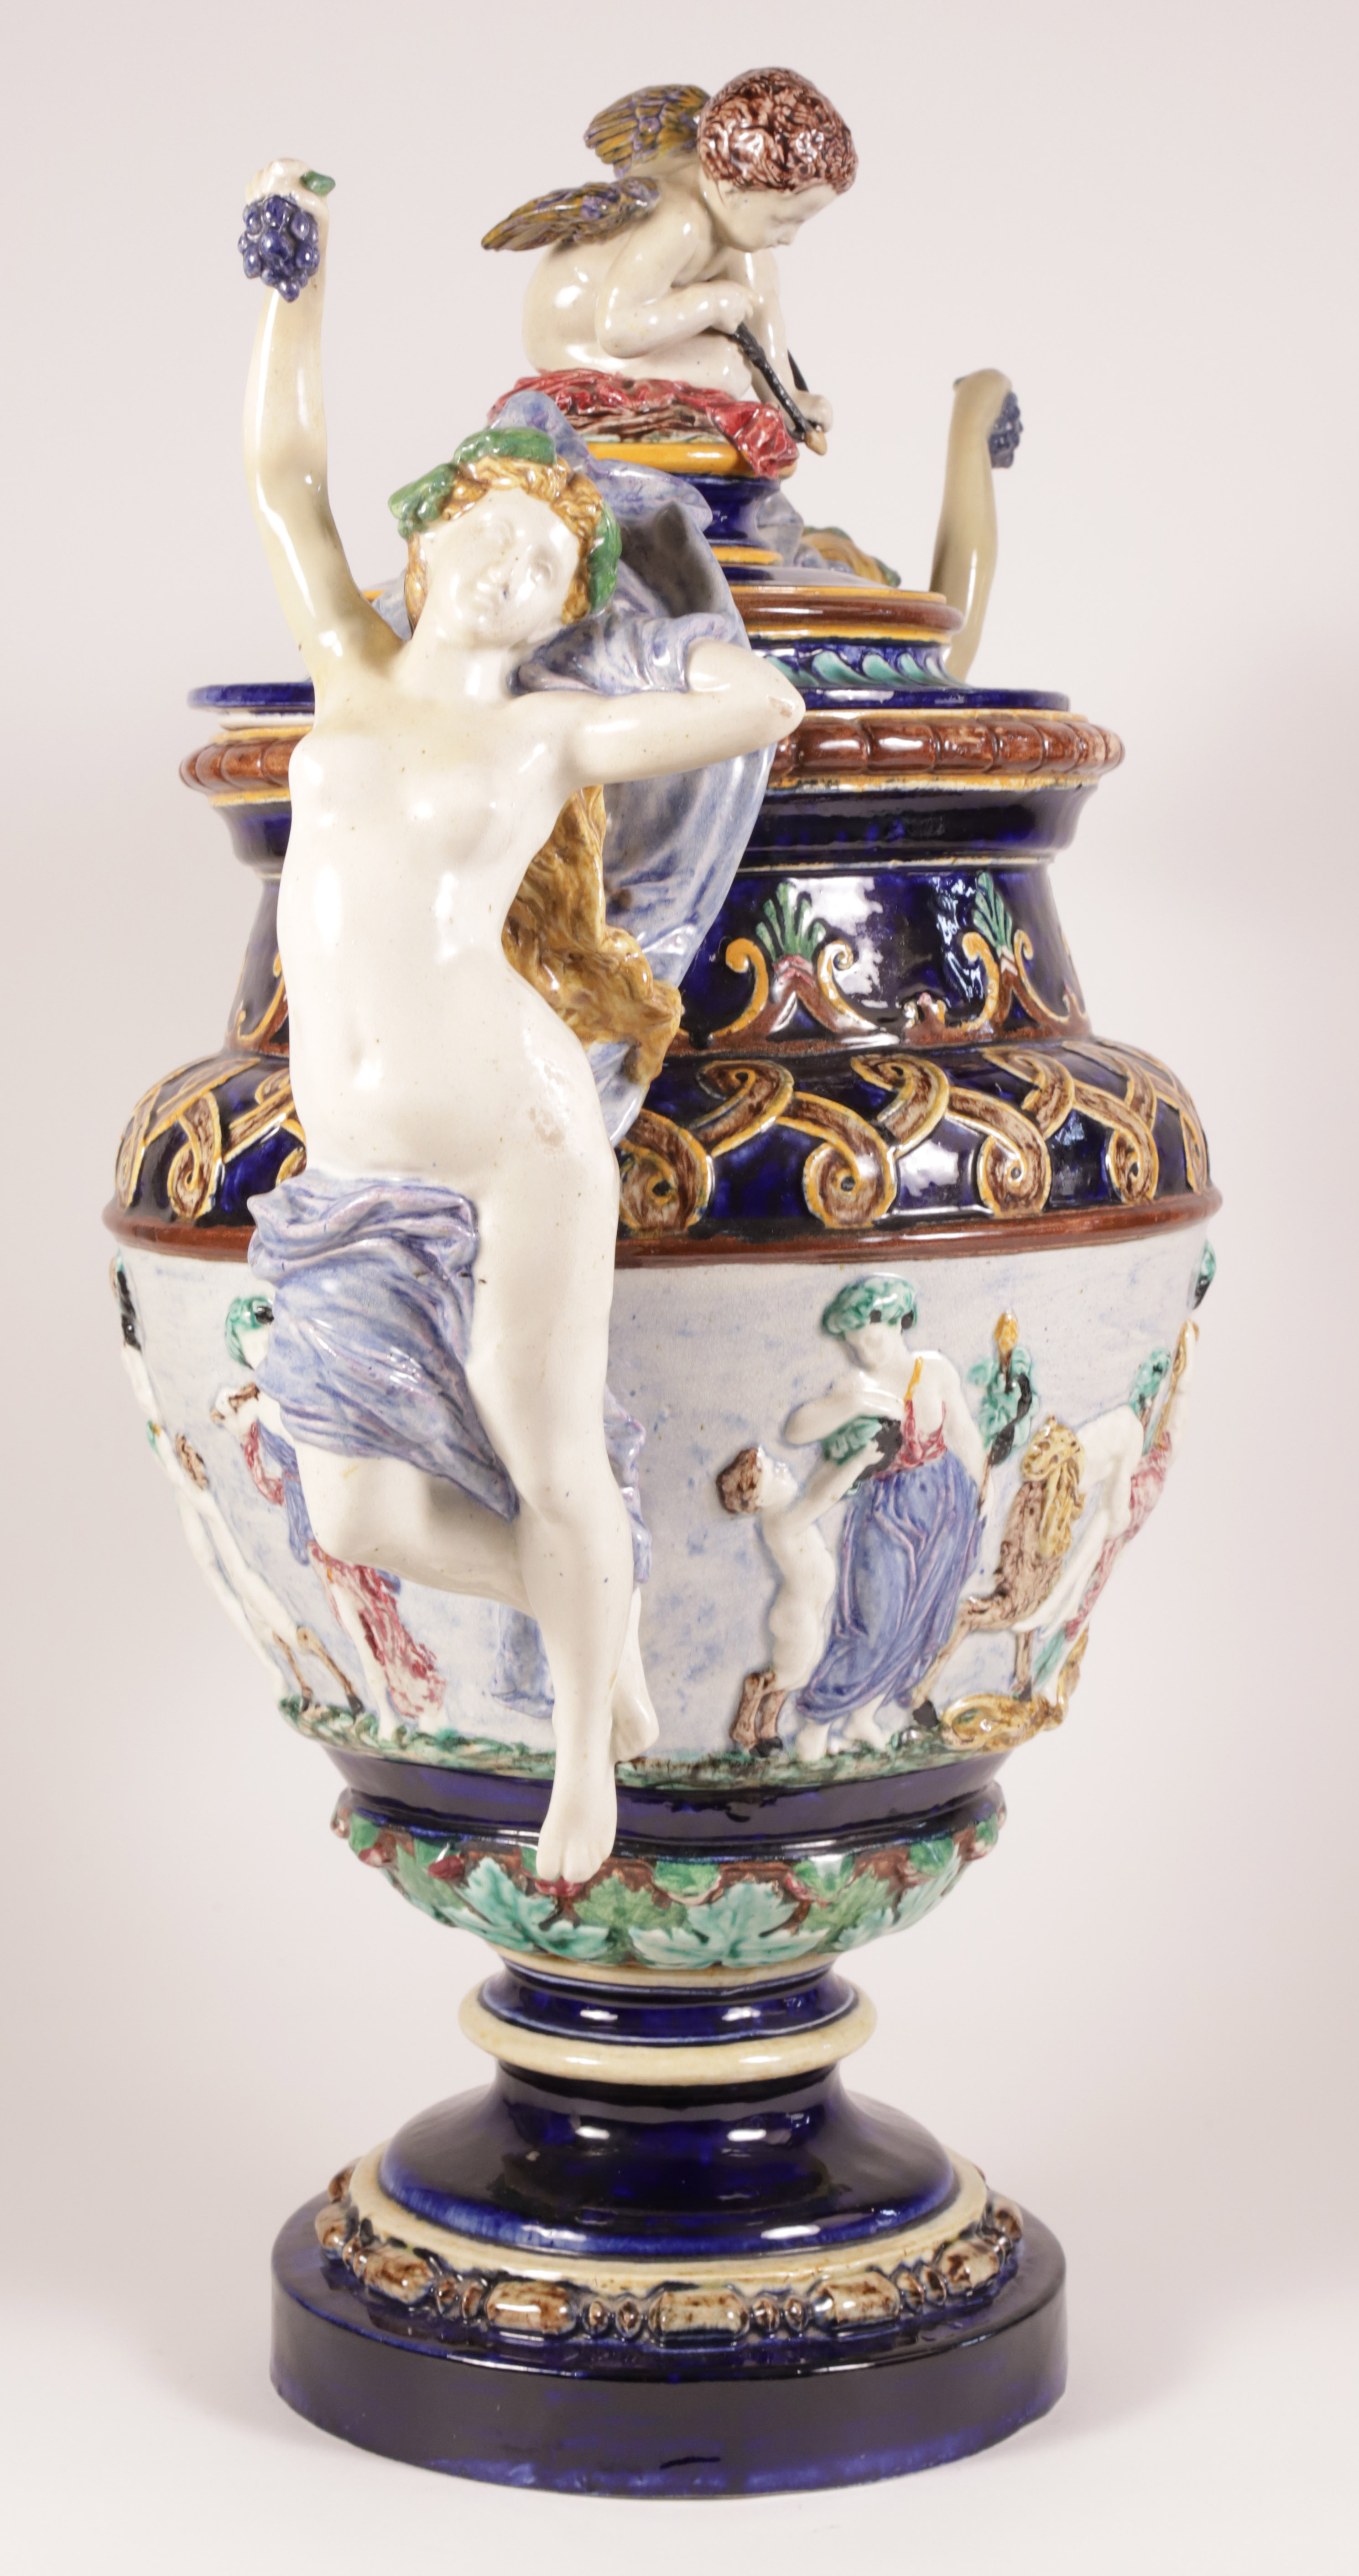 Antique Majolica Covered Vase with Two Maidens and Cherub